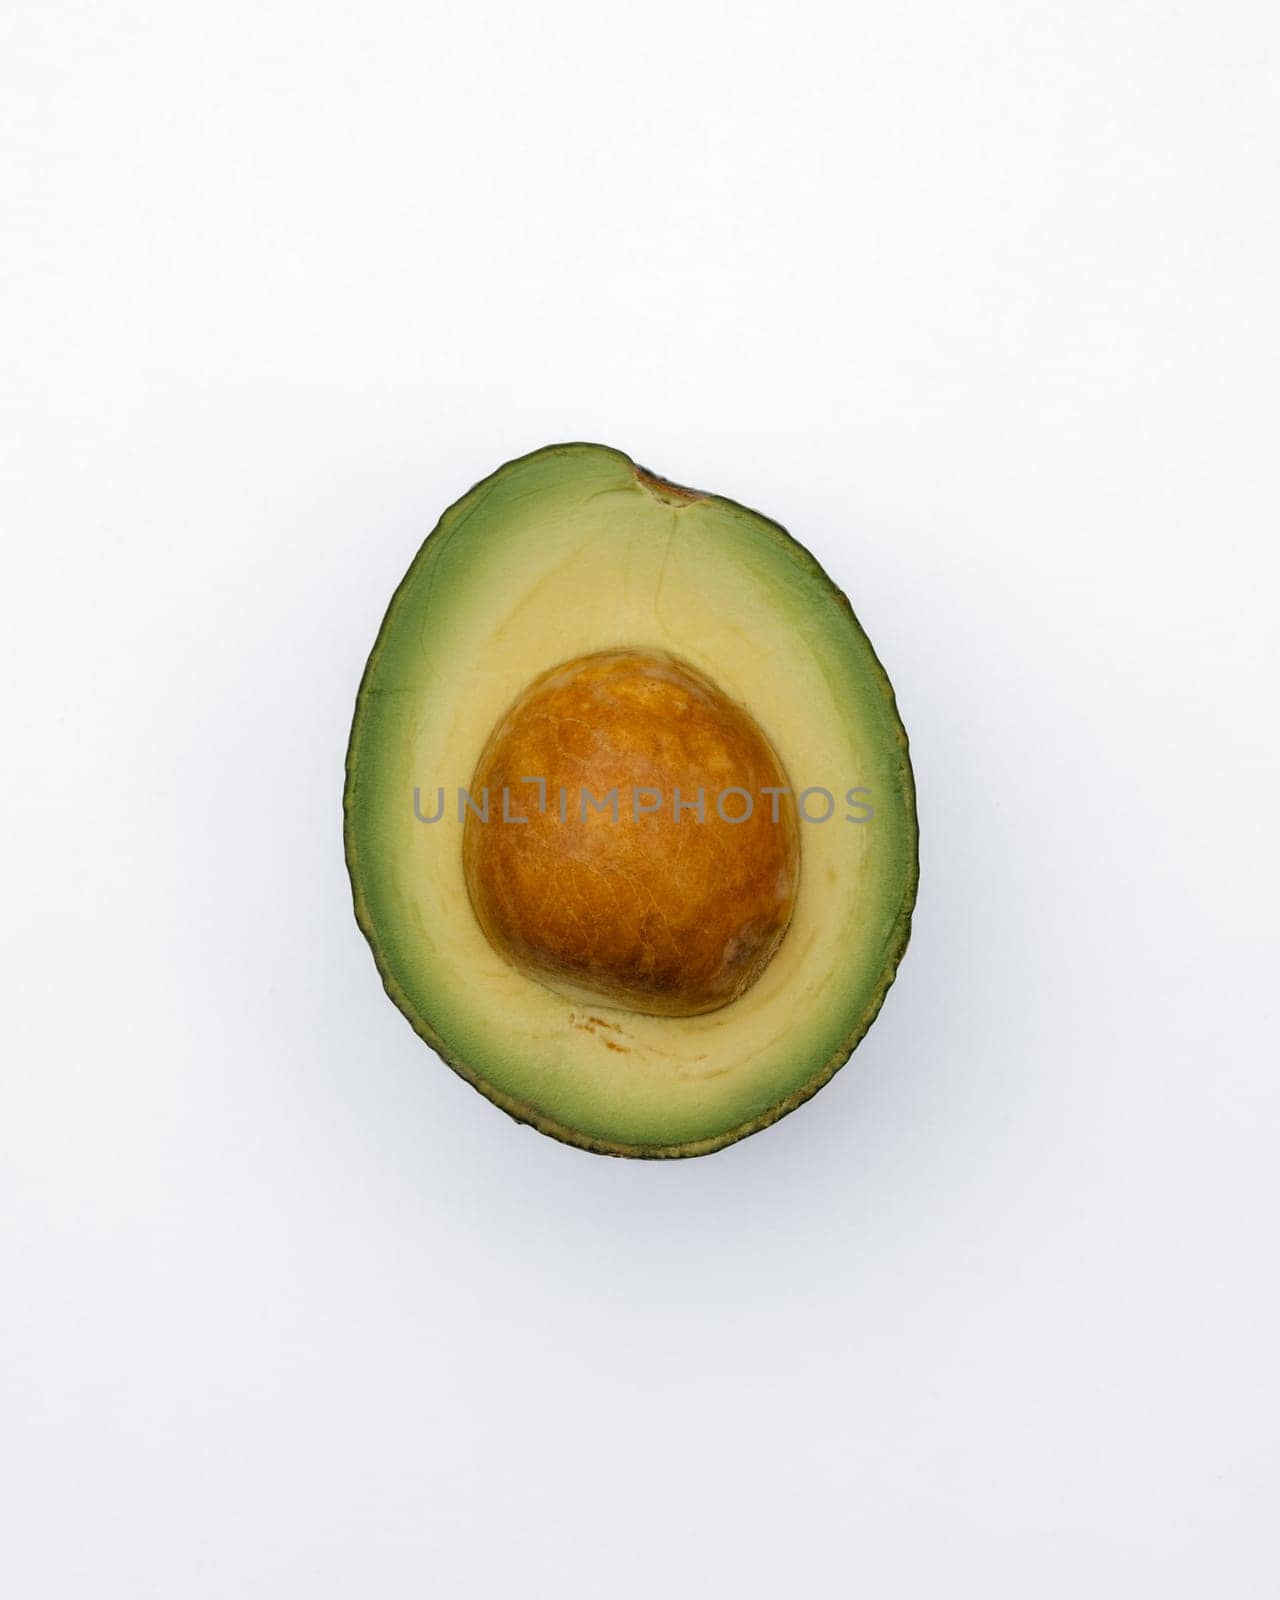 A cut avocado with its seed intact, presented on a stark white background to highlight its vibrant green color